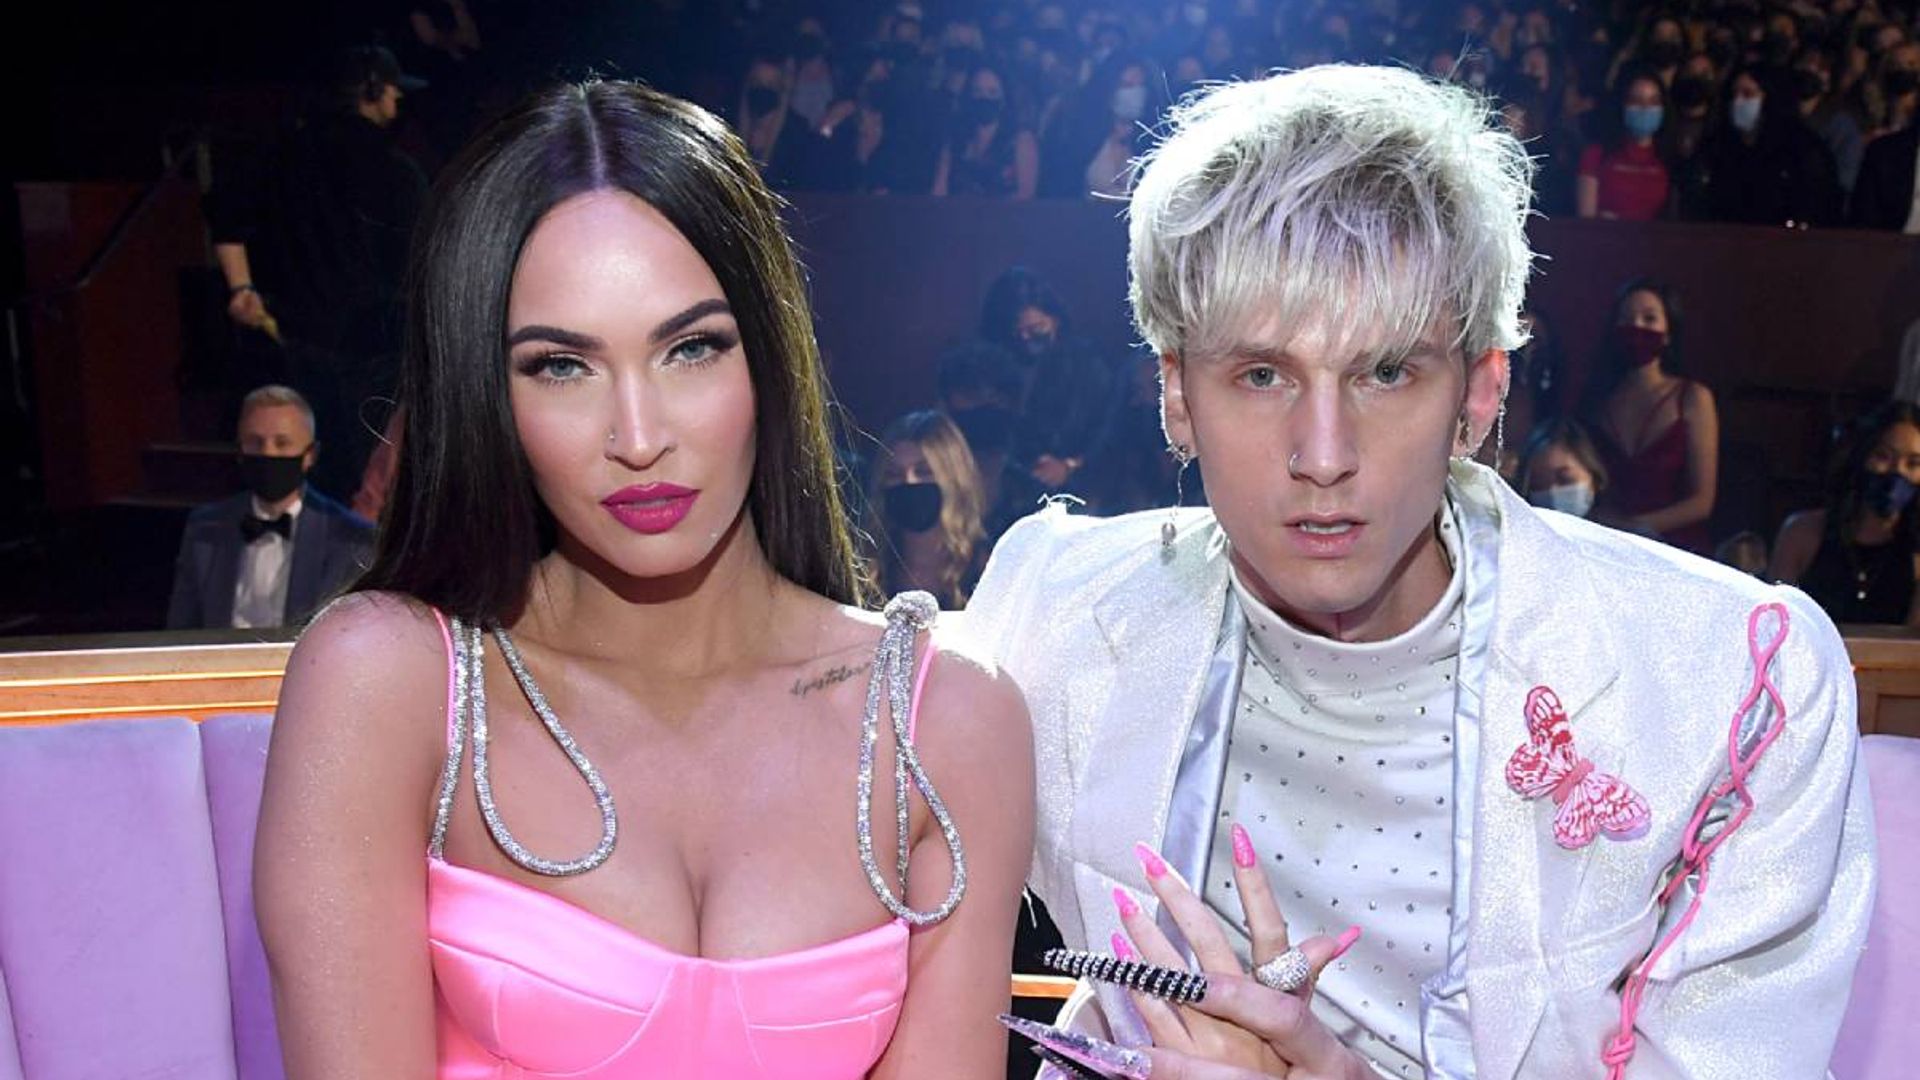 Megan Fox and Machine Gun Kelly are engaged - and the singer chose a very unique ring